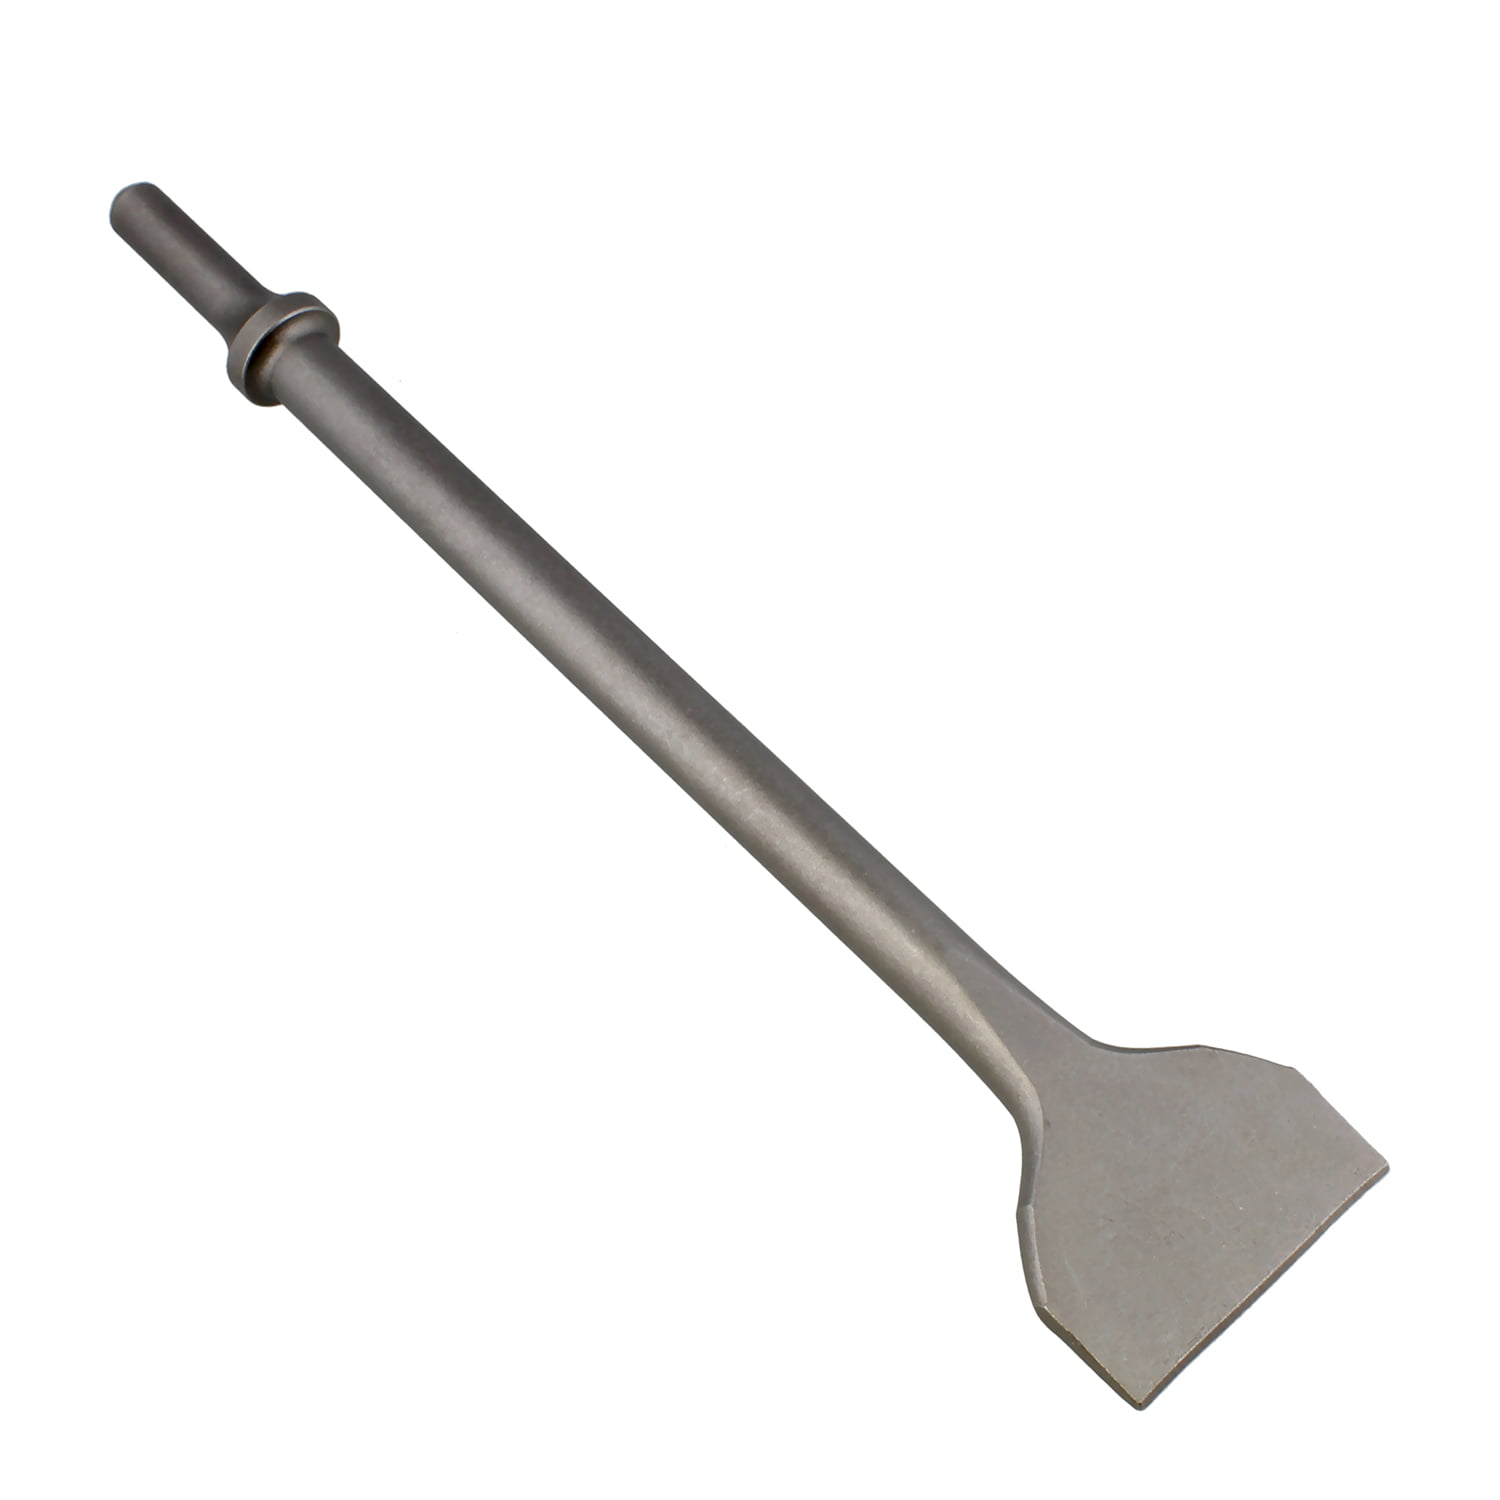 Chisel Blade for Air Scraper Chip and chisel mortar with this replacement 4 in 